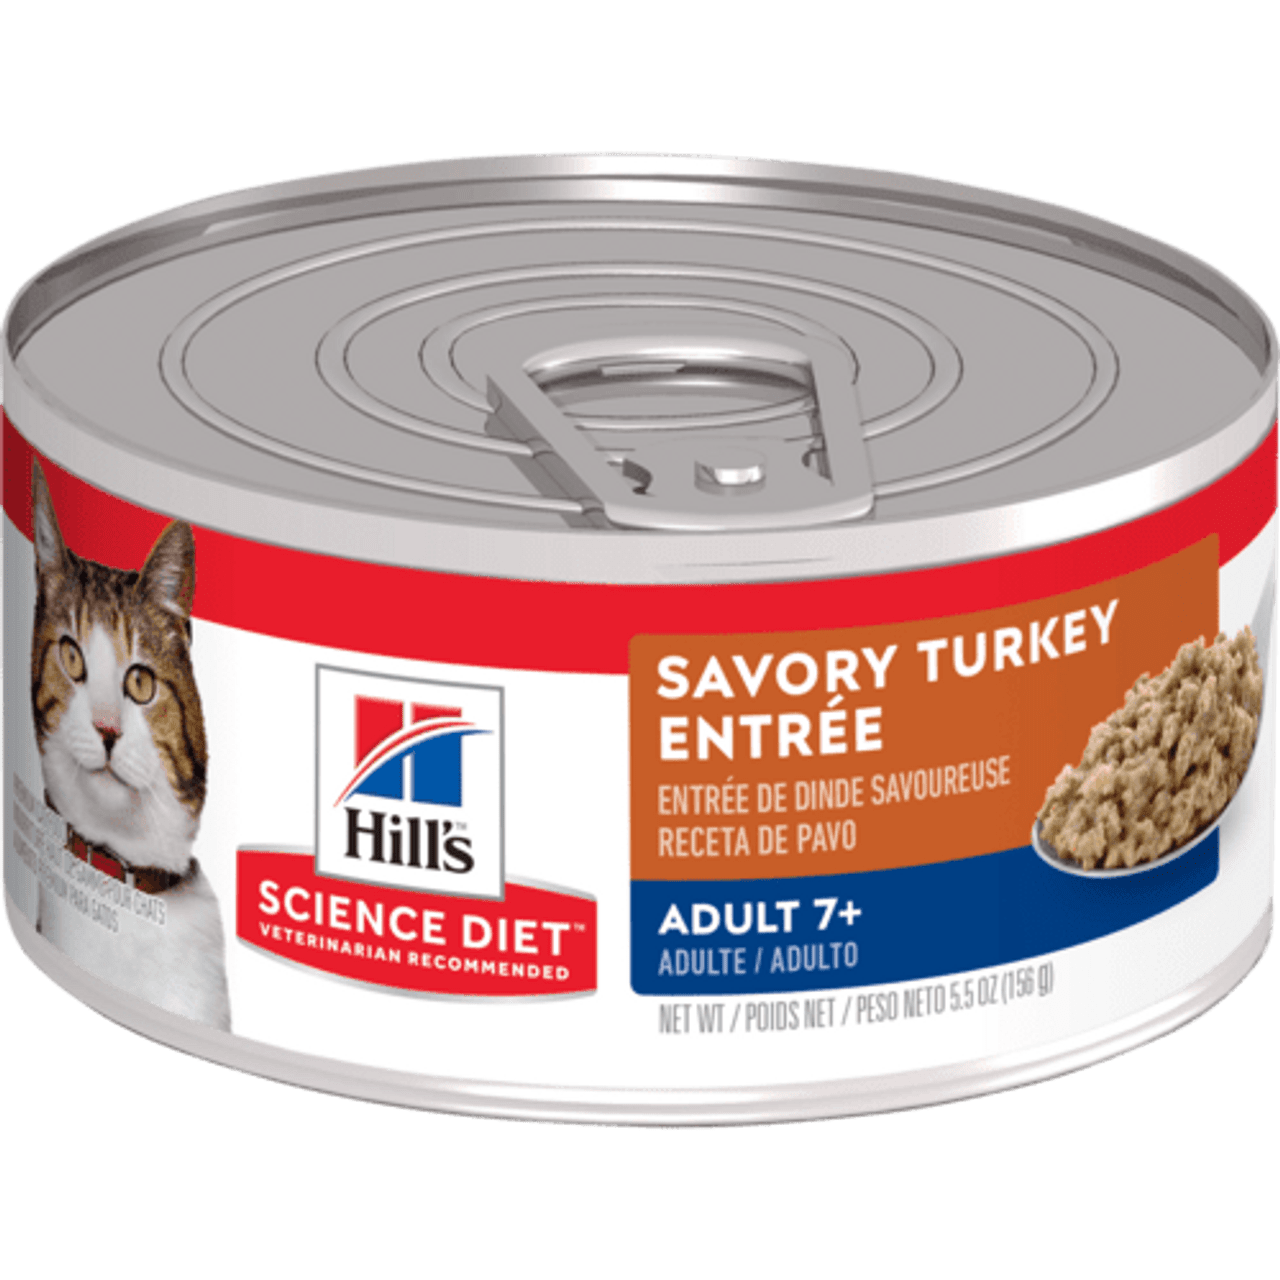 Hill's Science Diet Adult 7+ Savory Turkey Entree Canned Cat Food, 5.5oz